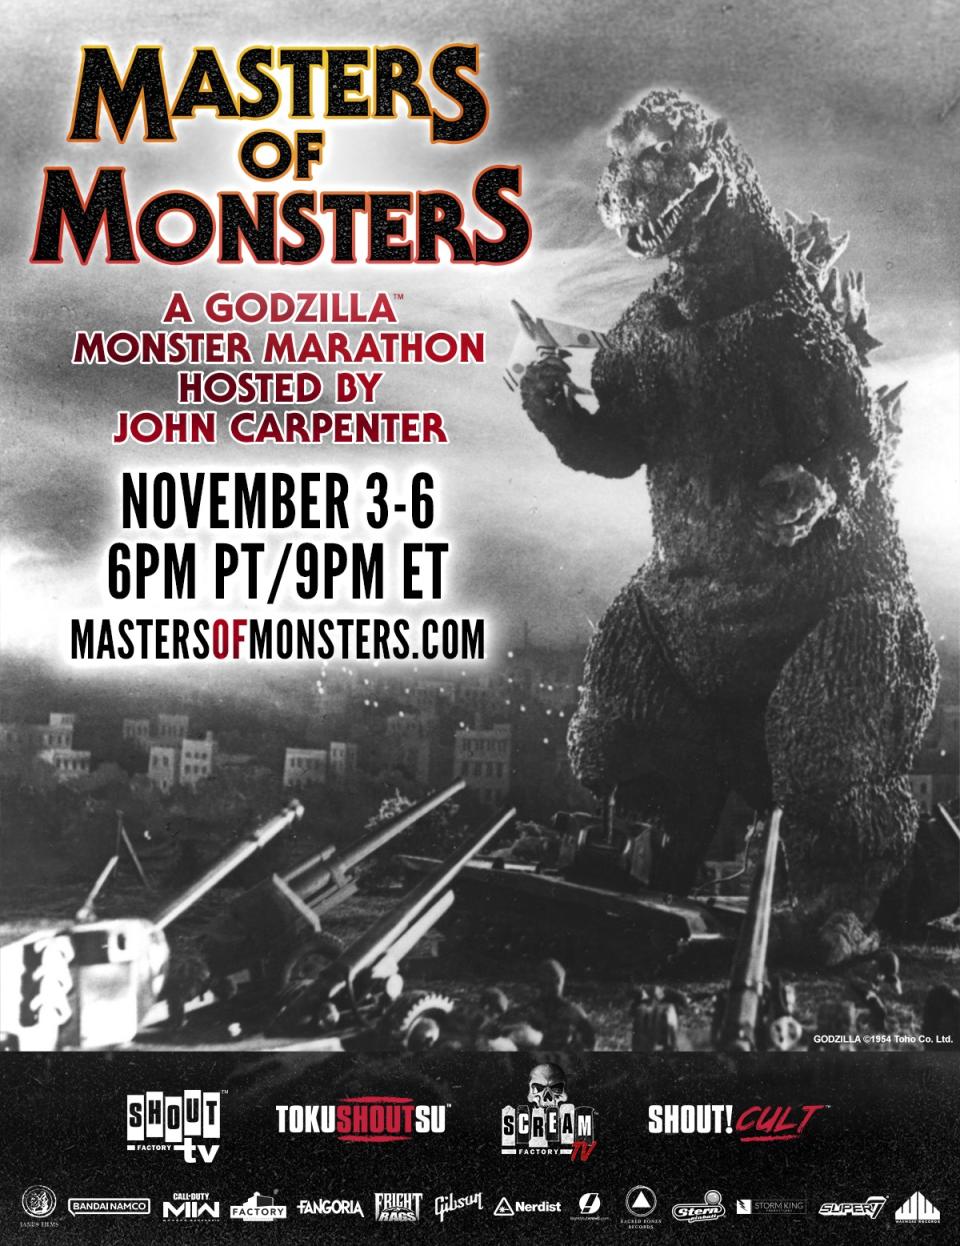 Key Art for Shout Factory TV's Masters of Monsters weekend featuring John Carpenter and Godzilla.